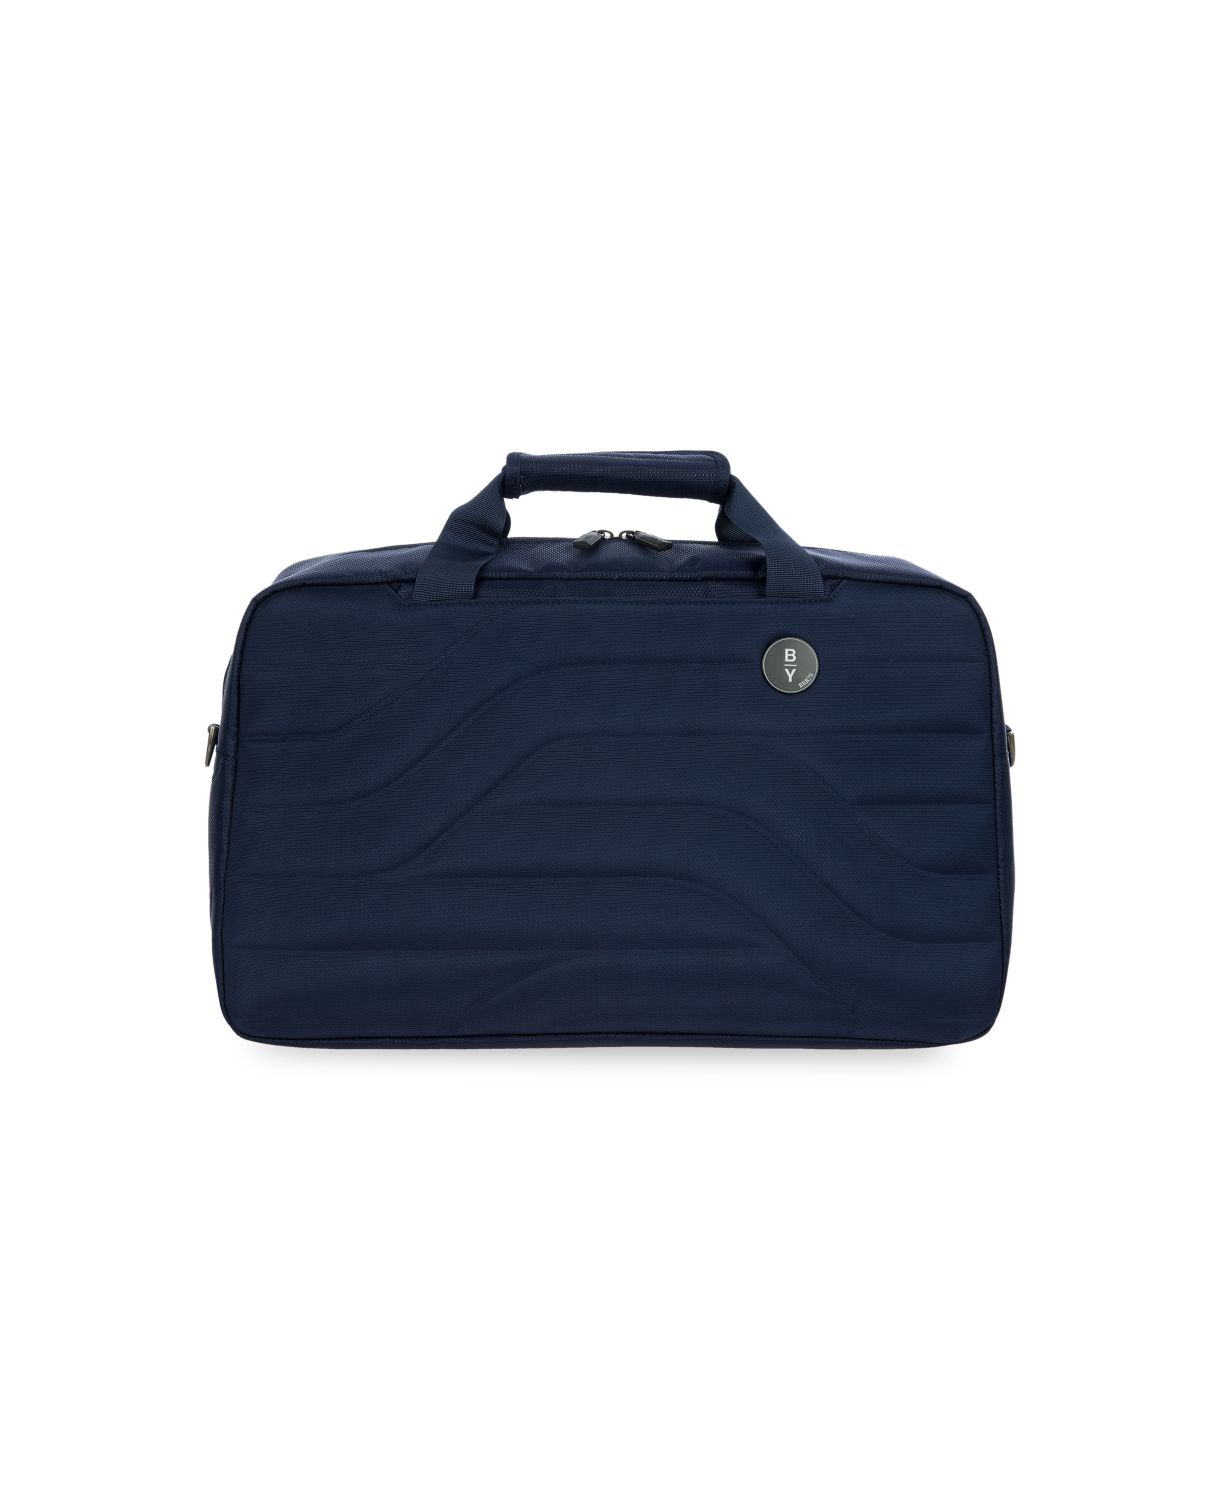 By Ulisse Travel Duffel Bric's